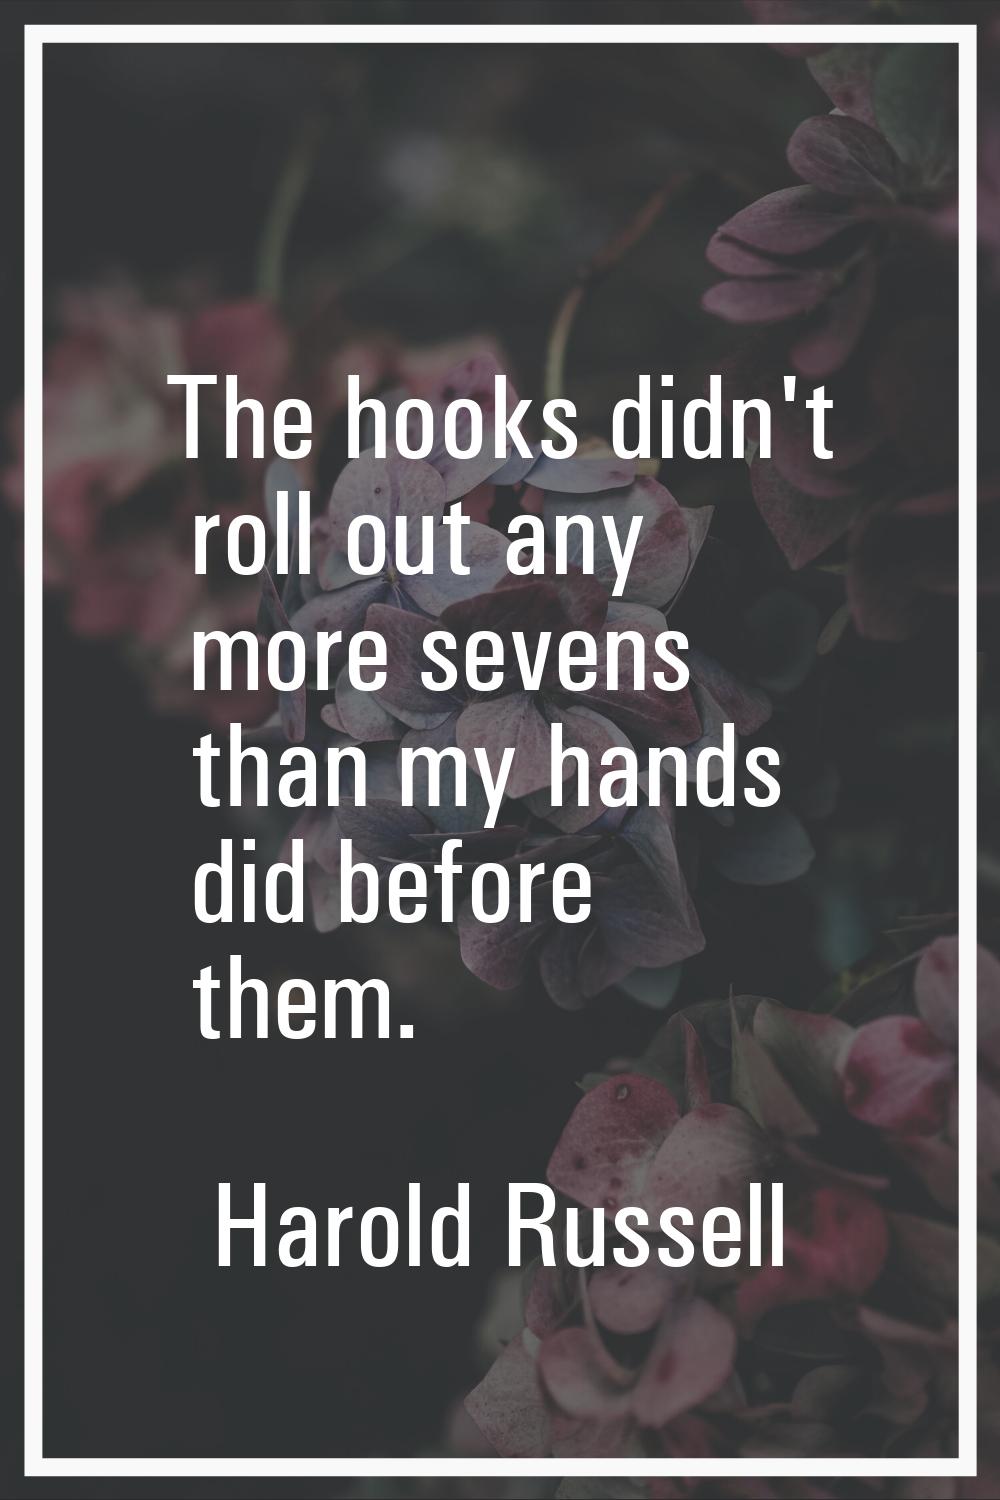 The hooks didn't roll out any more sevens than my hands did before them.